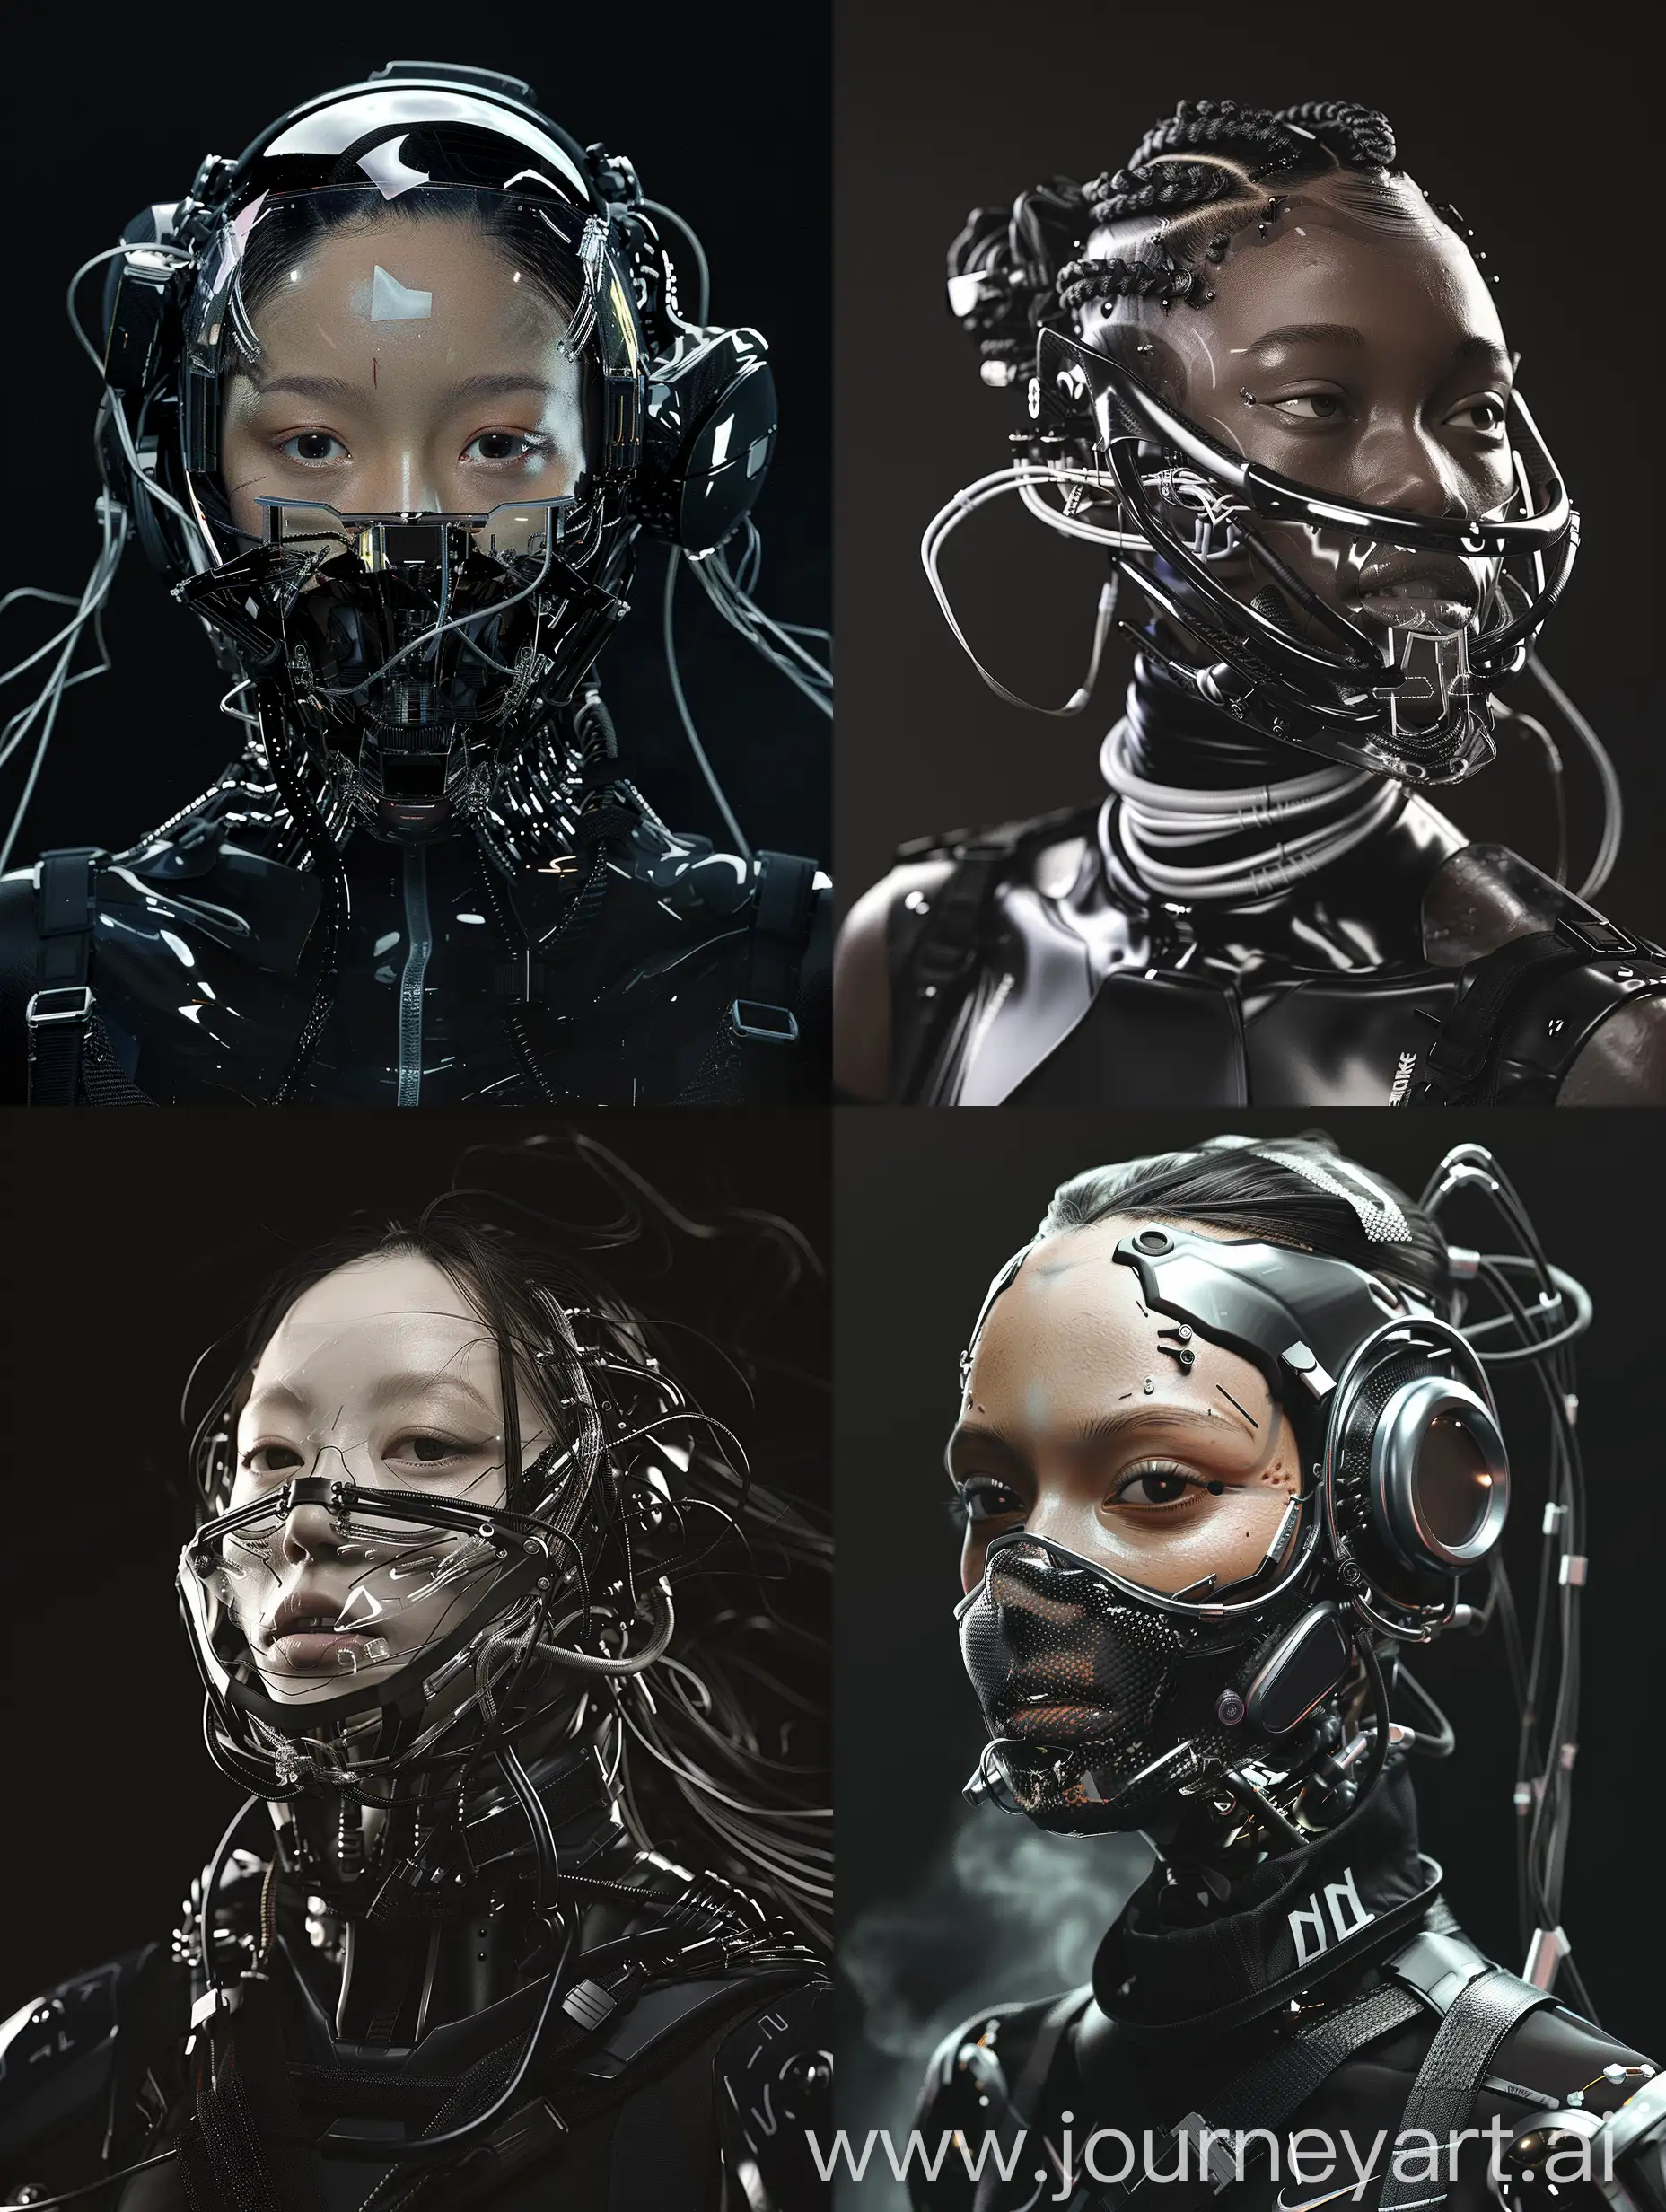 Against a sleek black backdrop, witness the captivating presence of a Beautiful character adorned with a cybernetic mouth-covering mask. It seamlessly merges cutting-edge technology with intricate details, showcasing carbon fiber textures, sleek aluminum accents, glass details and wires. Symbolizing the delicate equilibrium between humanity and machine, her appearance embodies the essence of a futuristic cyberpunk aesthetic, further accentuated by Nike-inspired add-ons. With dynamic movements reminiscent of action-packed film sequences, accompanied by cinematic haze and an electric energy, she exudes an irresistible allure that commands attention.